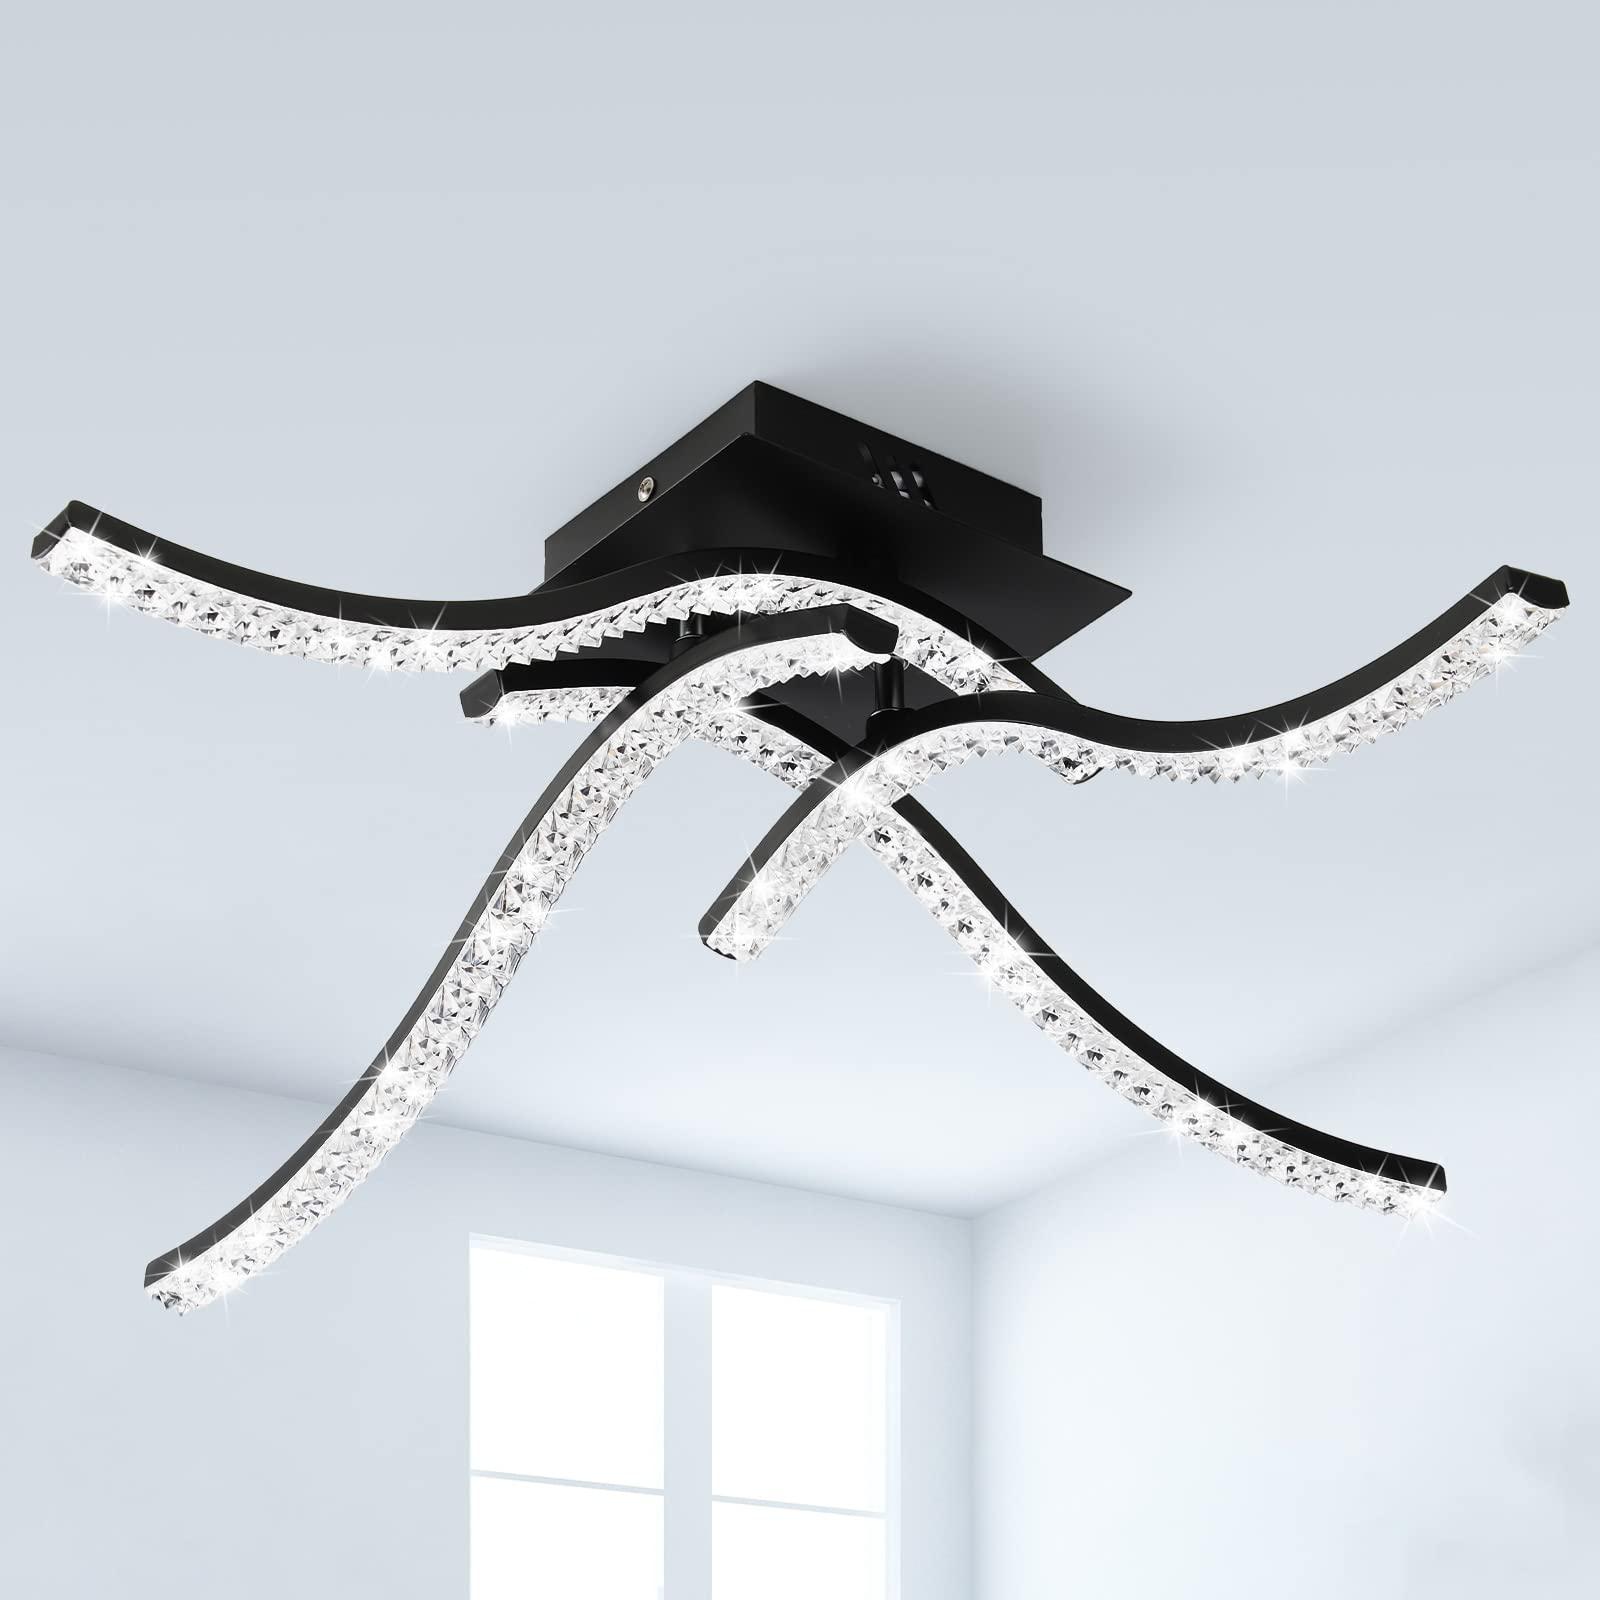 Zewanny Modern LED Ceiling Light,Acrylic Ceiling Lamps with 4 Built-in LED Boards,Elegant Curved Design 32W 3520LM,Ceiling Fixture for Dining Room Living Room Bedroom Kitchen Hallway 0